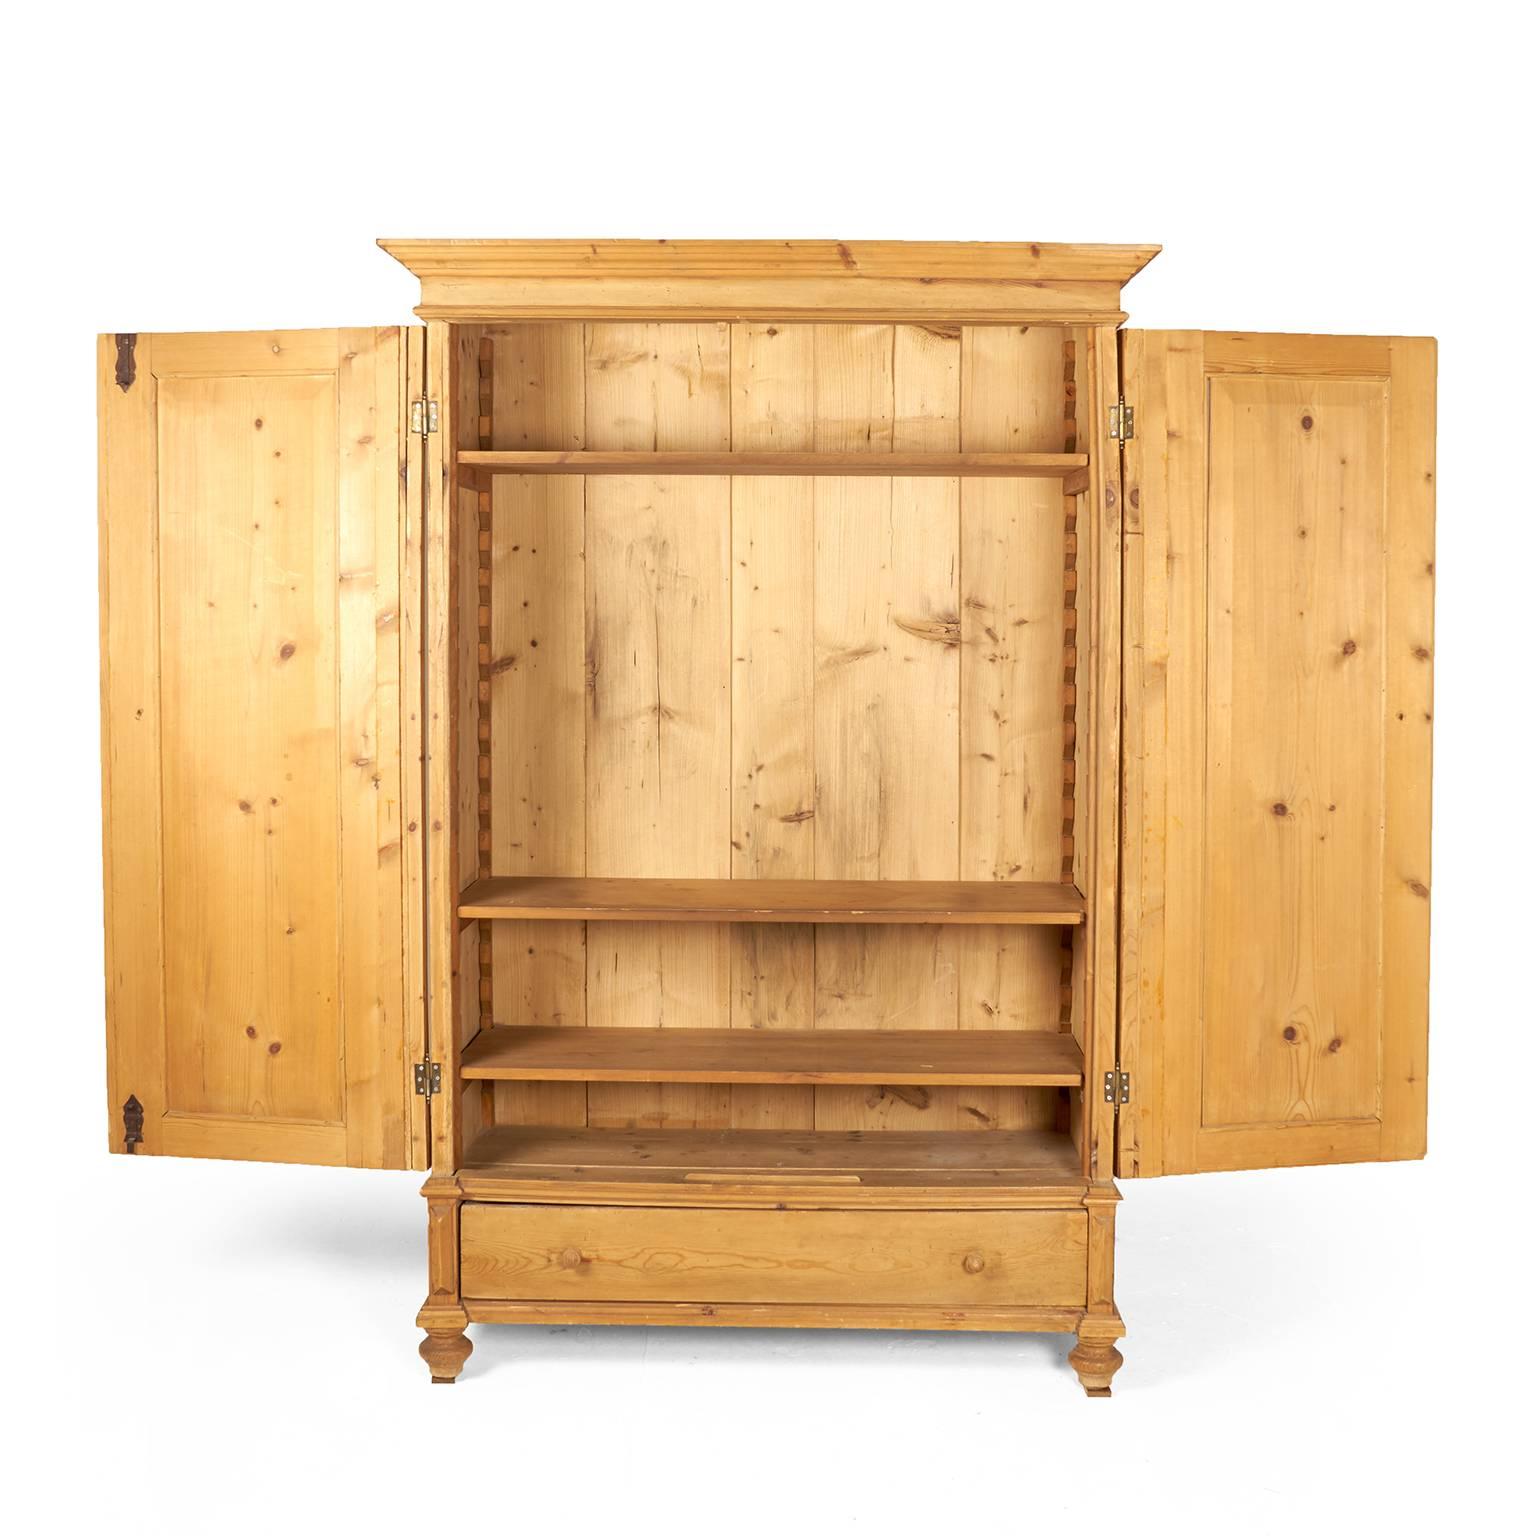 A late-19th century Continental European two-door pine armoire with space for hanging or shelf storage above, and a small drawer below, circa 1890.



       